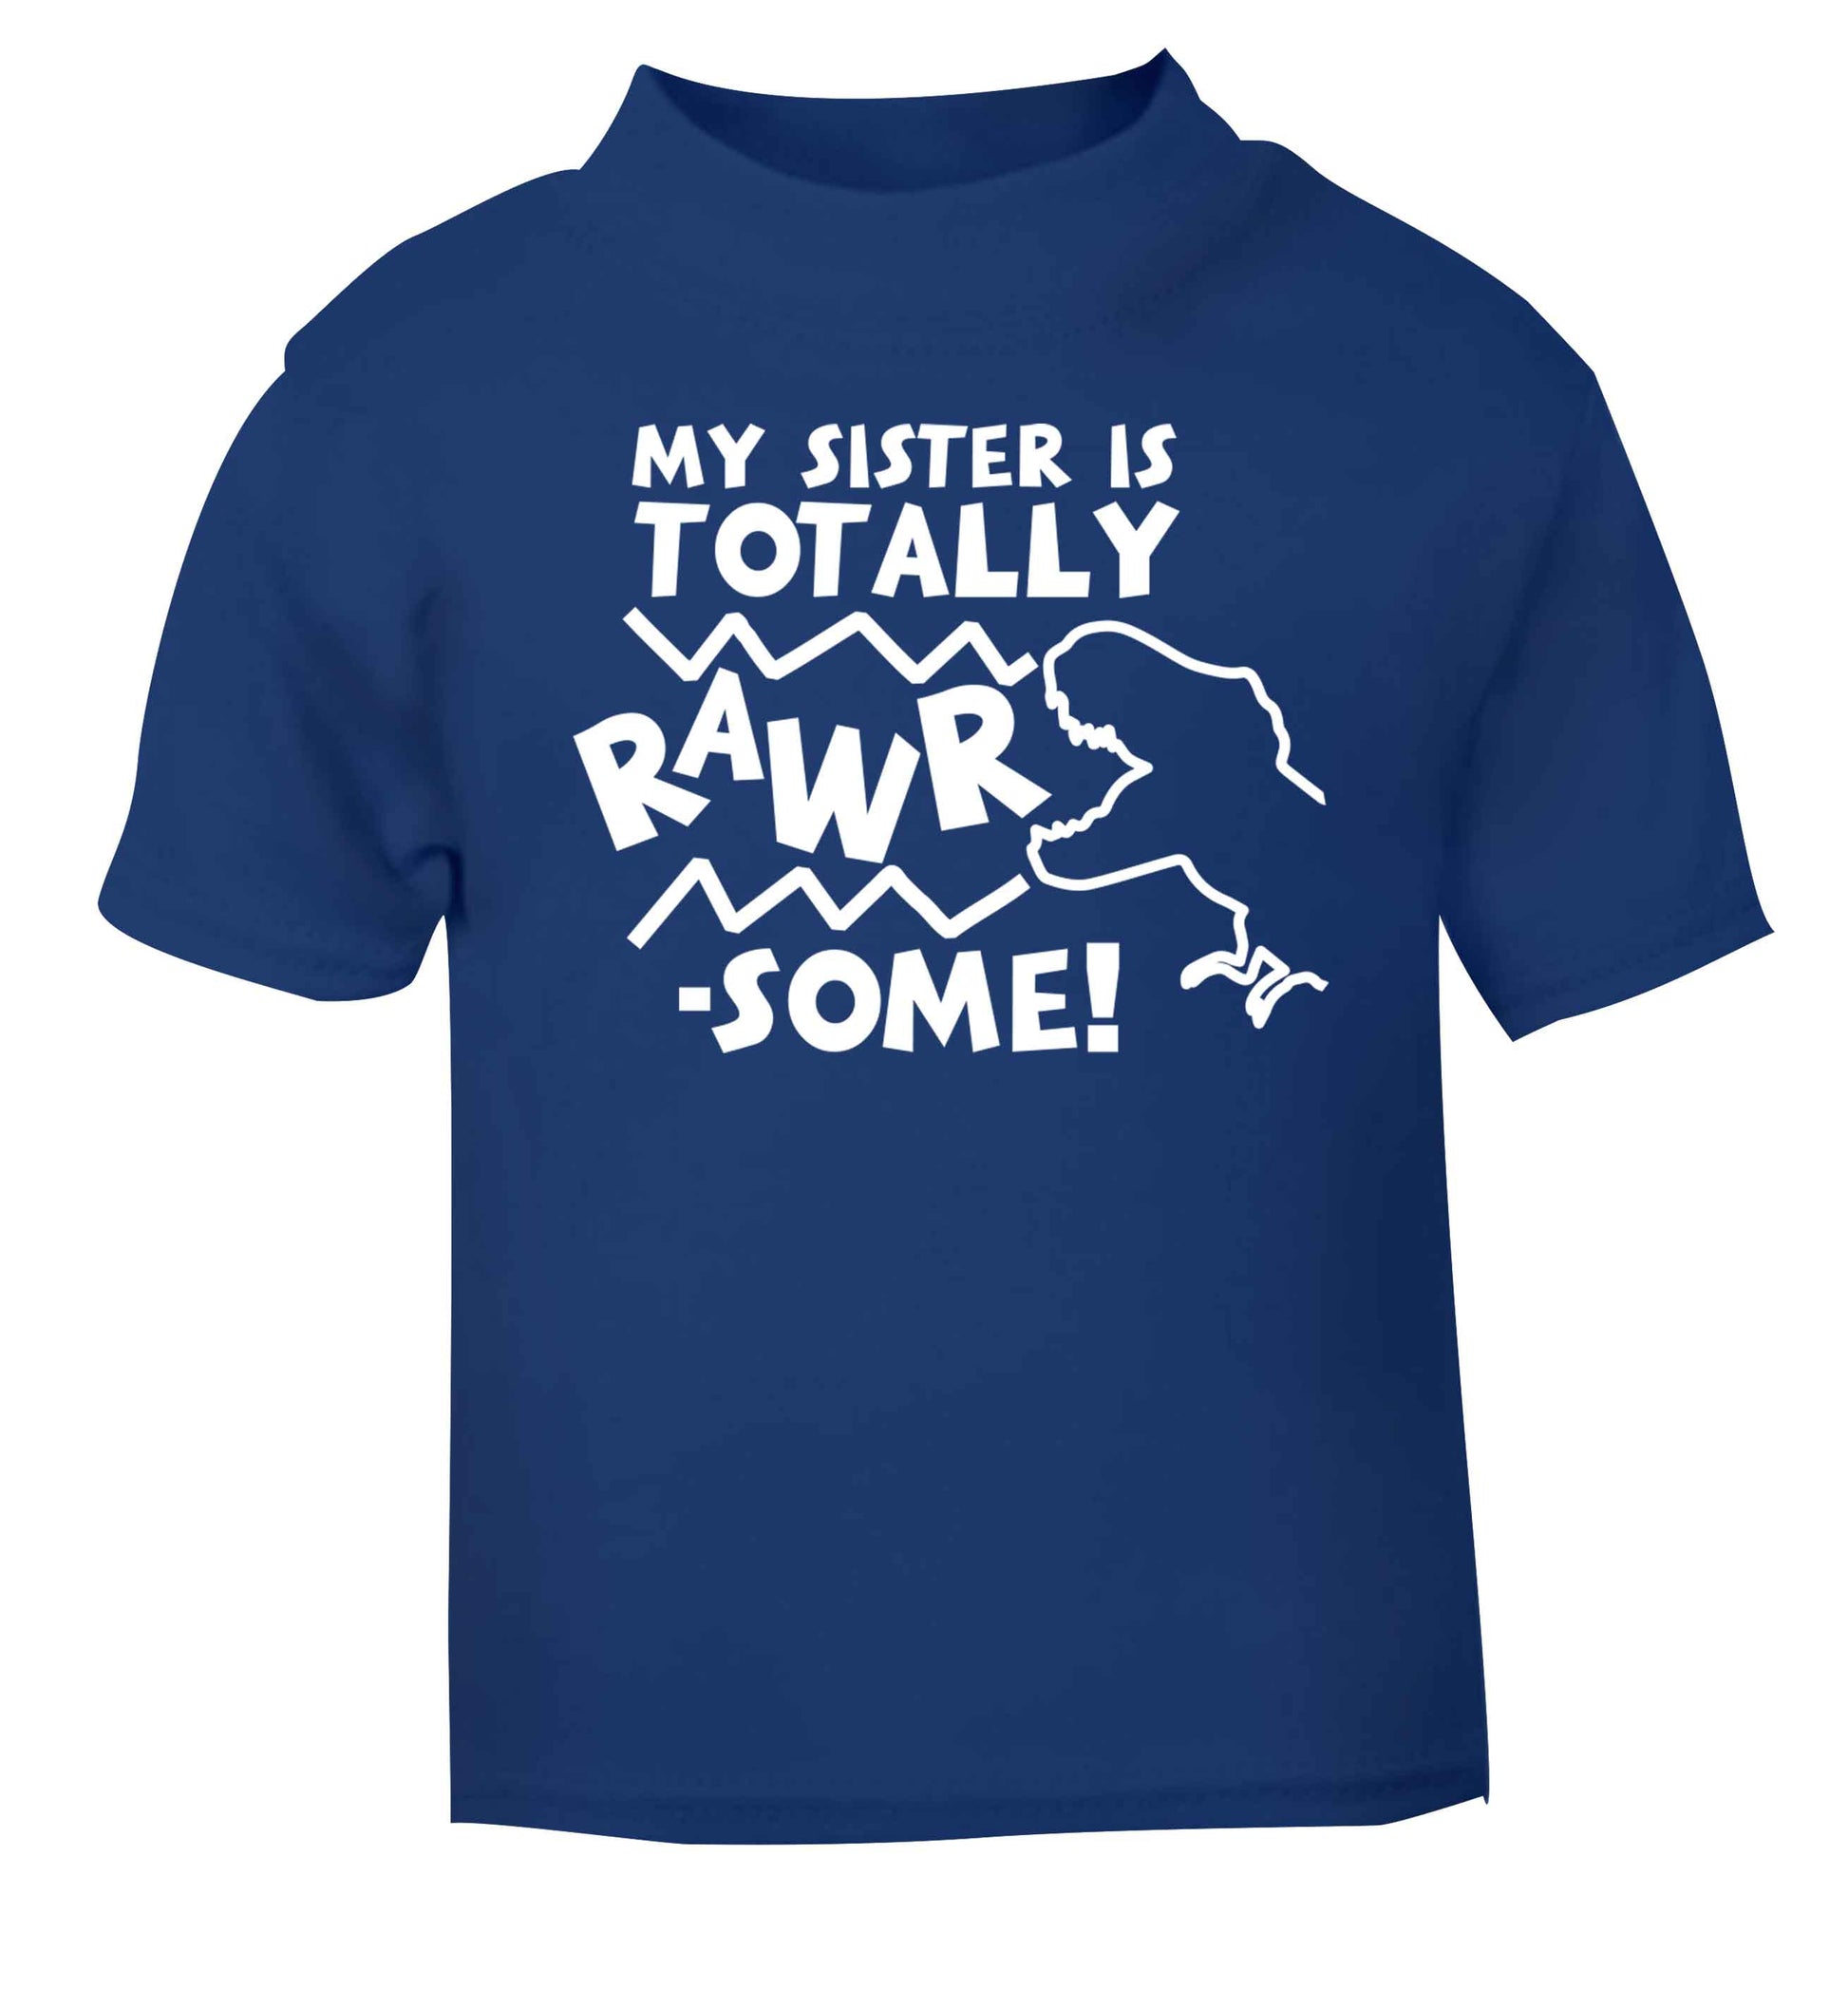 My sister is totally rawrsome blue baby toddler Tshirt 2 Years